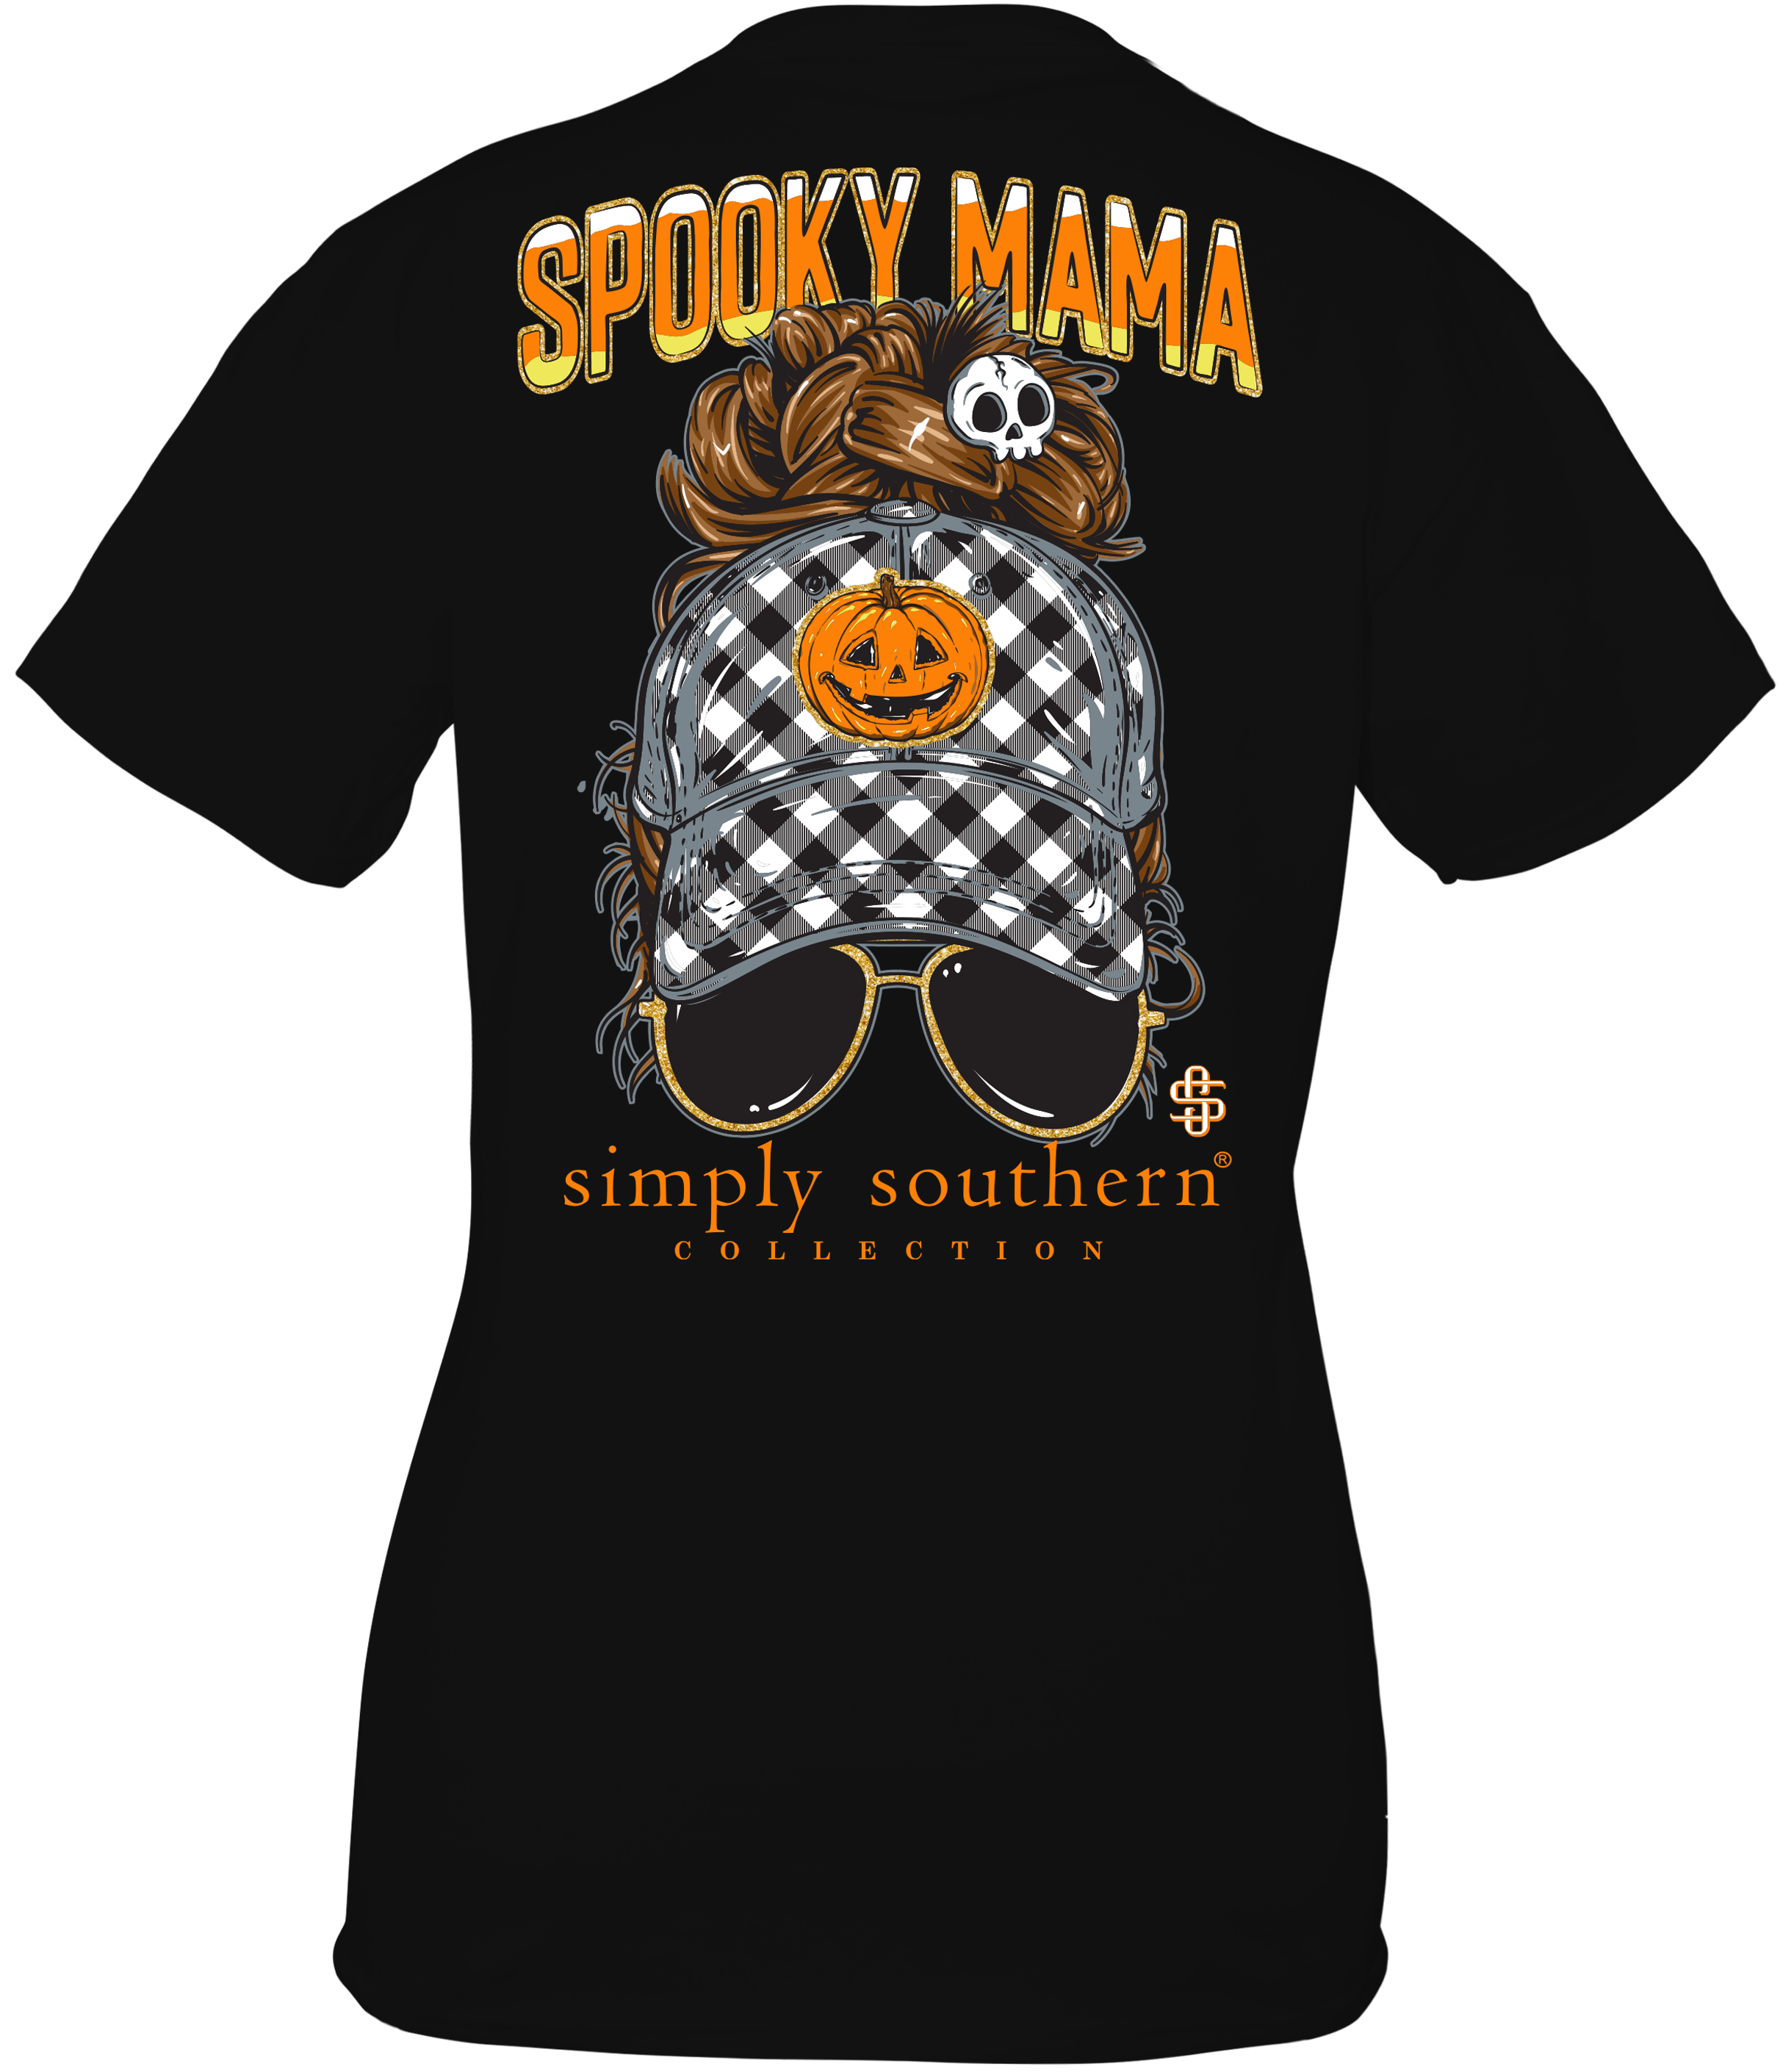 'Spooky Mama' Short Sleeve Tee by Simply Southern